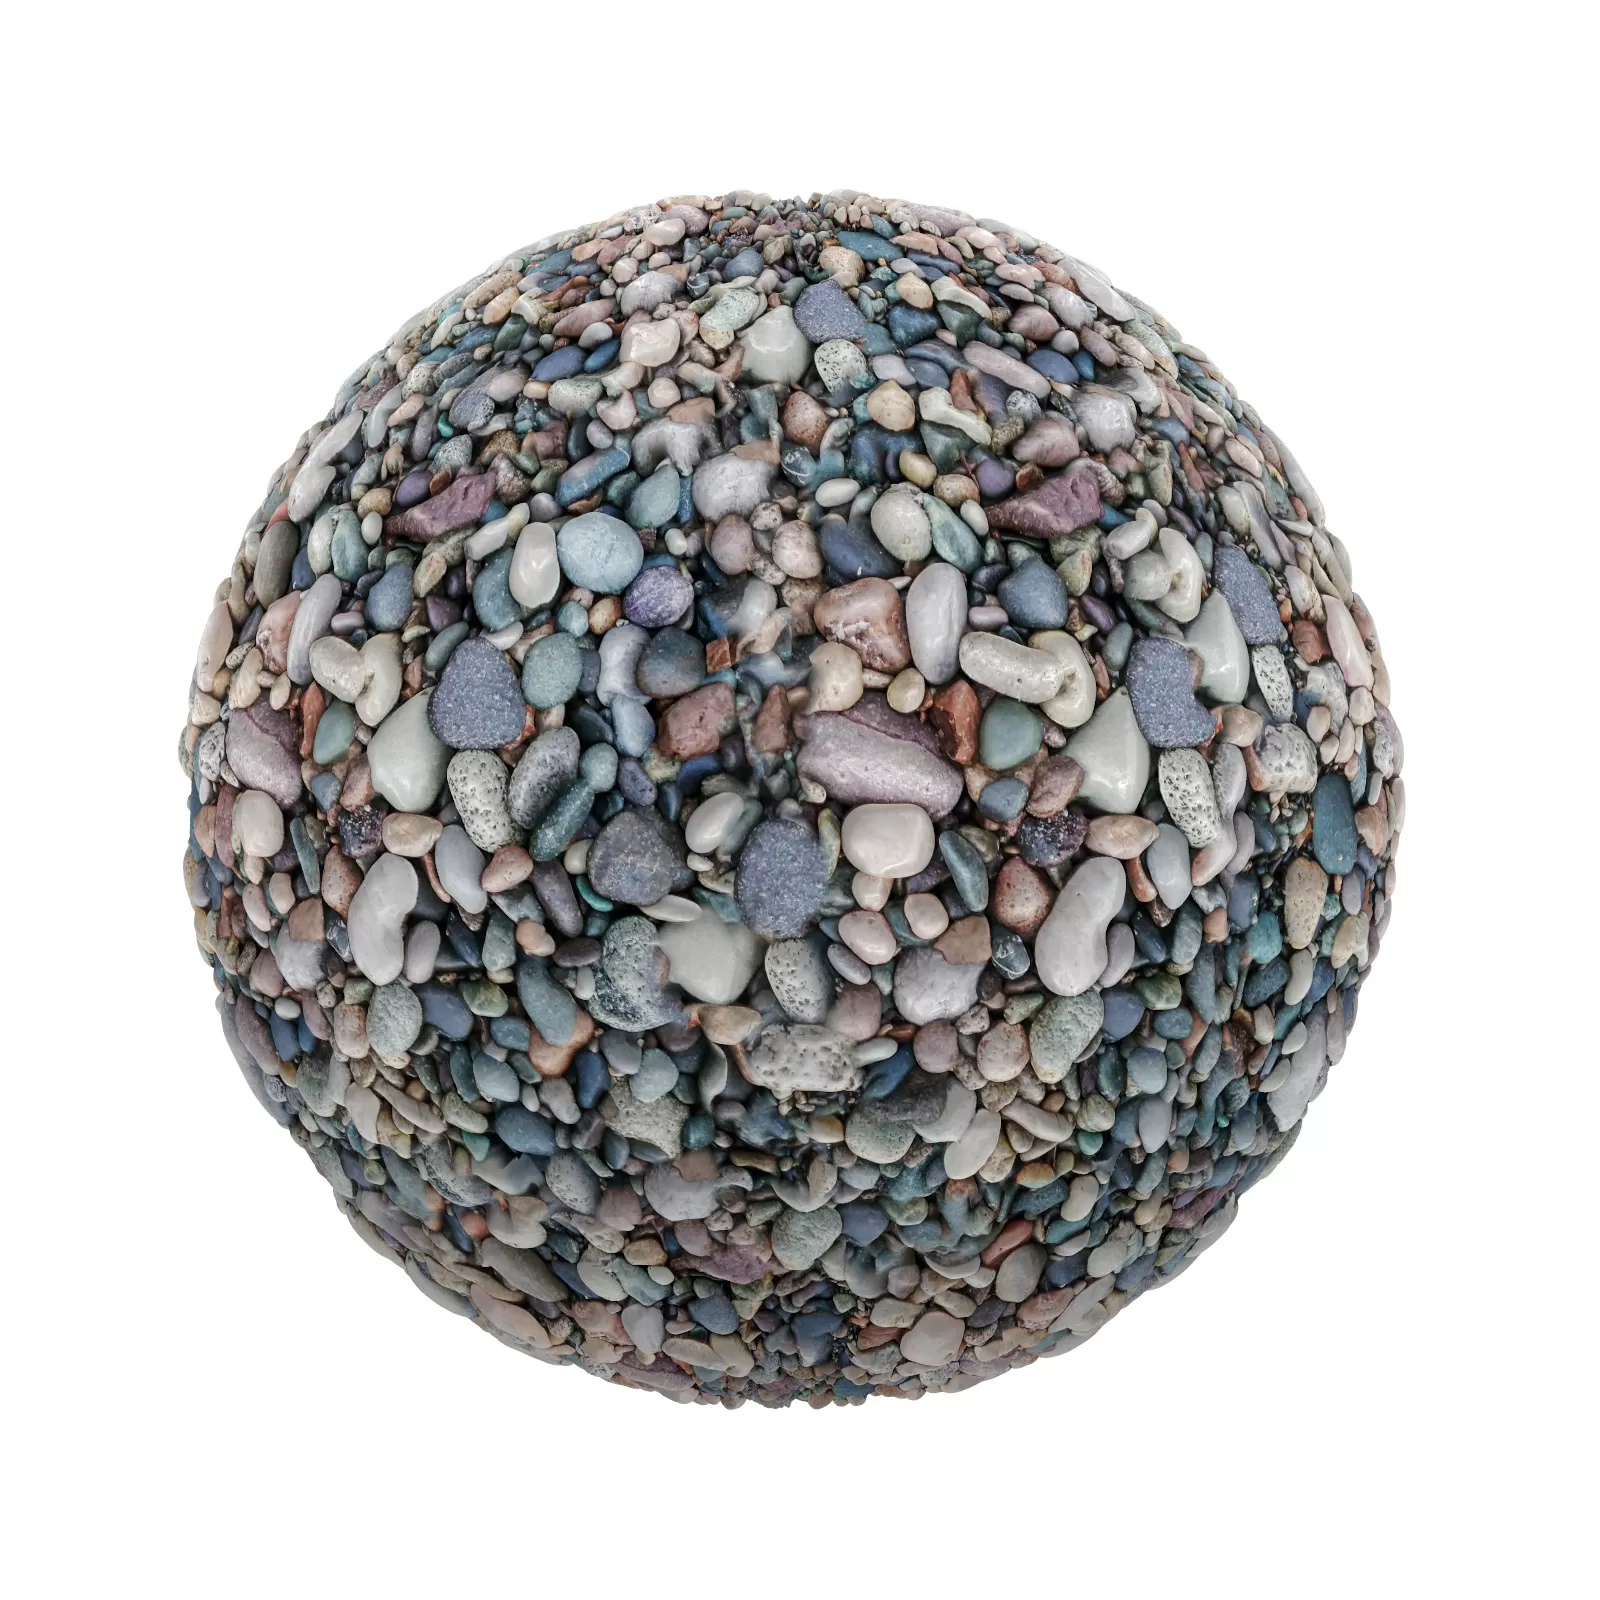 TEXTURES – STONES – CGAxis PBR Colection Vol 1 Stones – colorful pebbles